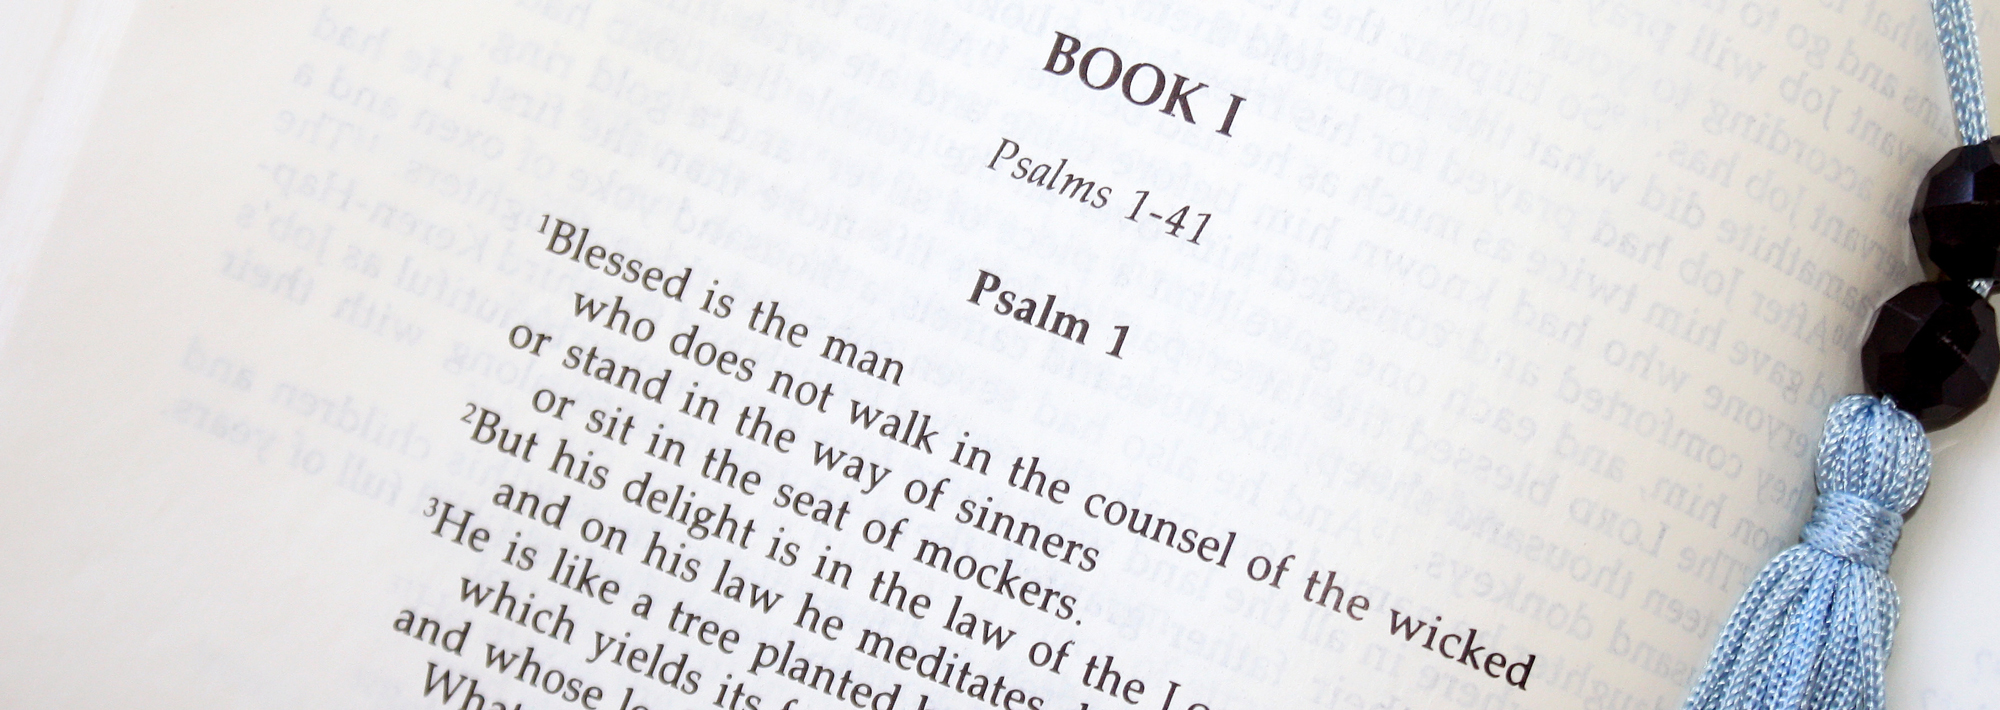 The “Blessing” of Psalm 1